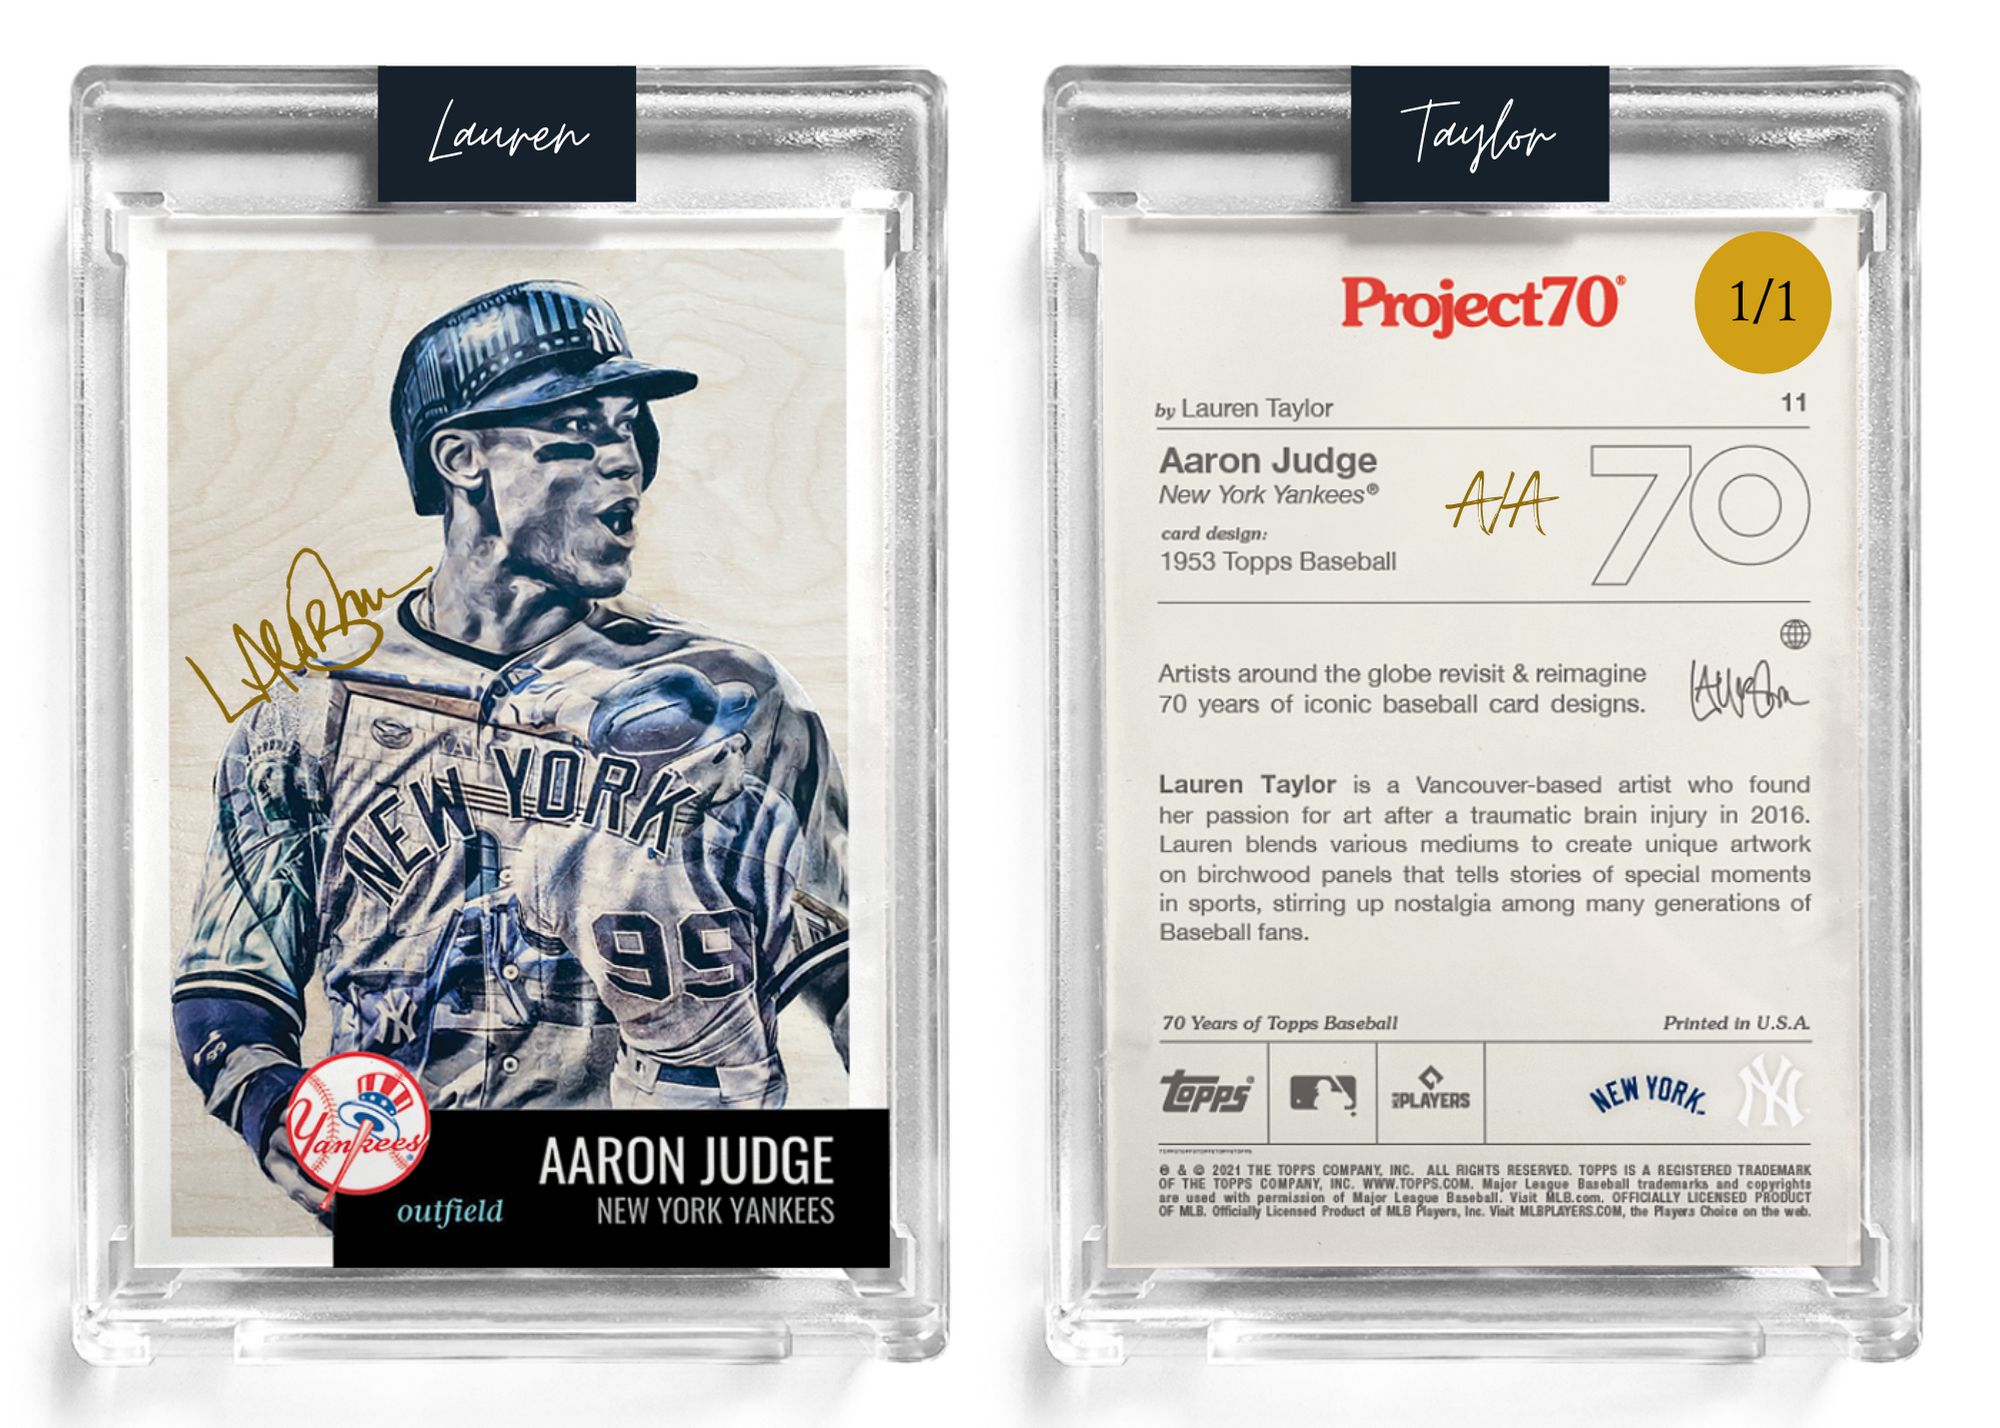 1/1 Gold Artist Signature - Topps Project 70 130pt card #11 by Lauren Taylor - Aaron Judge